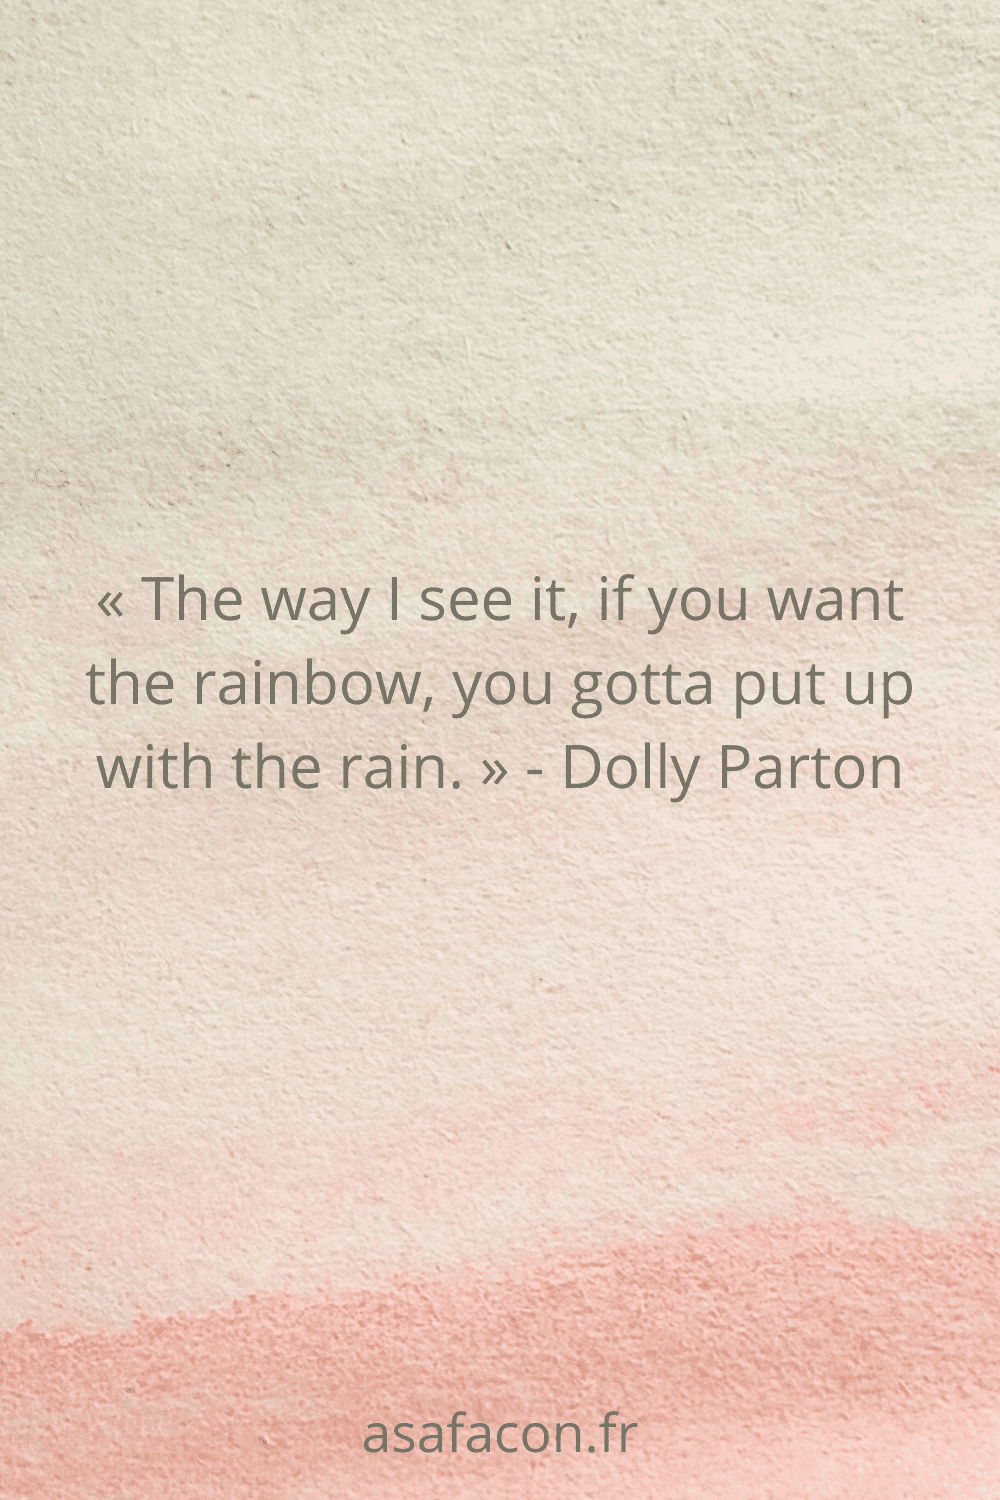 « The way I see it, if you want the rainbow, you gotta put up with the rain. » - Dolly Parton